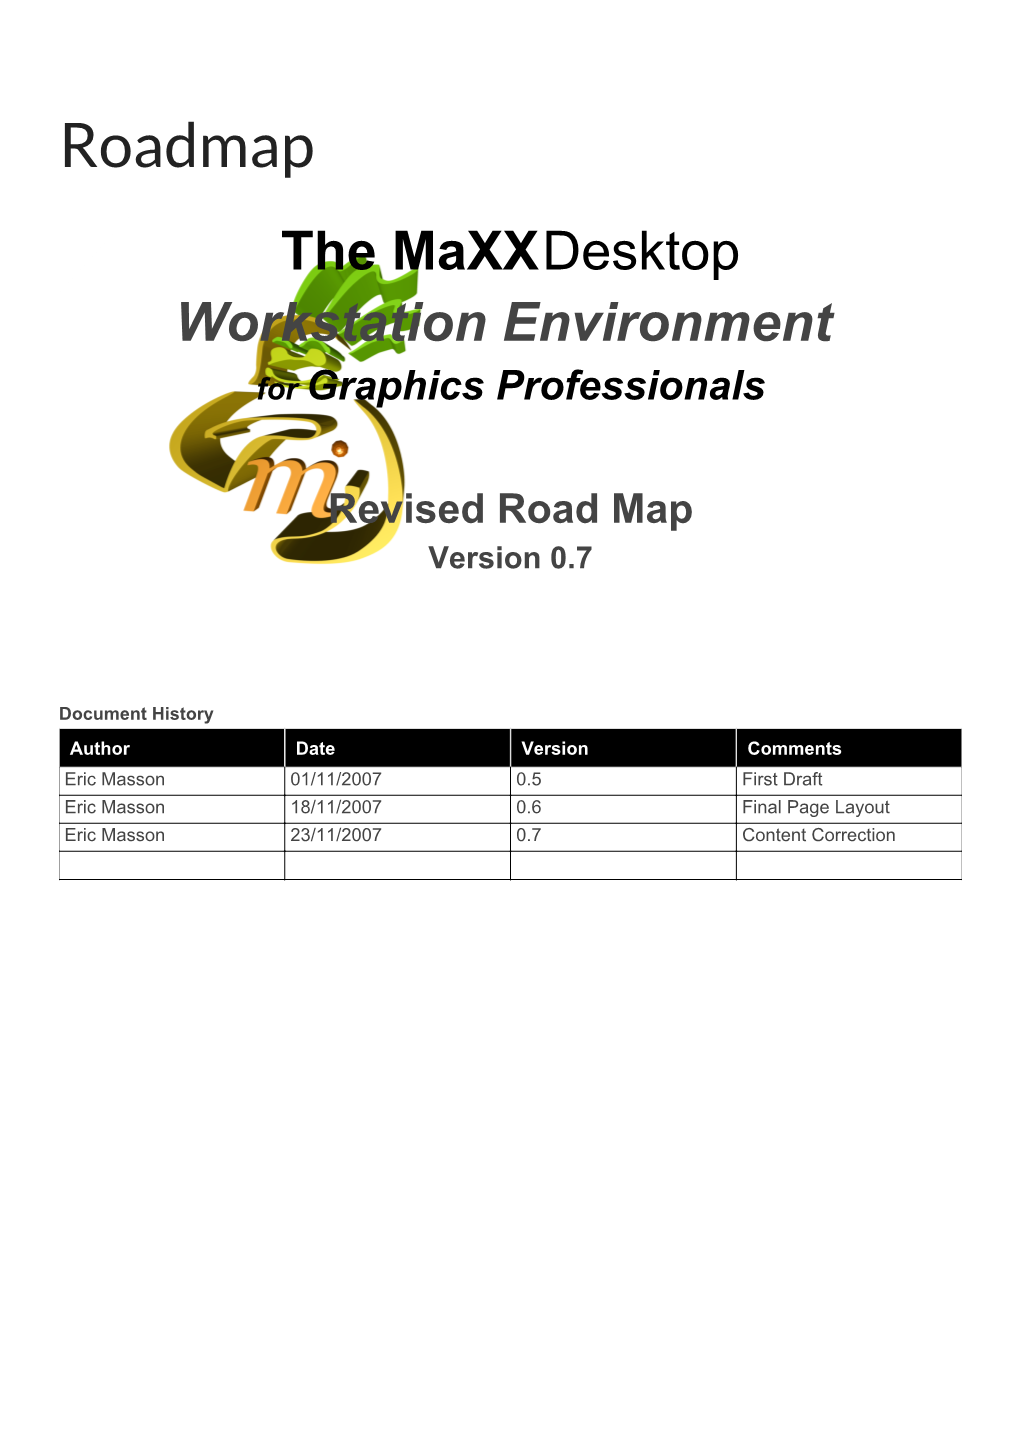 Roadmap the Maxxdesktop Workstation Environment for Graphics Professionals